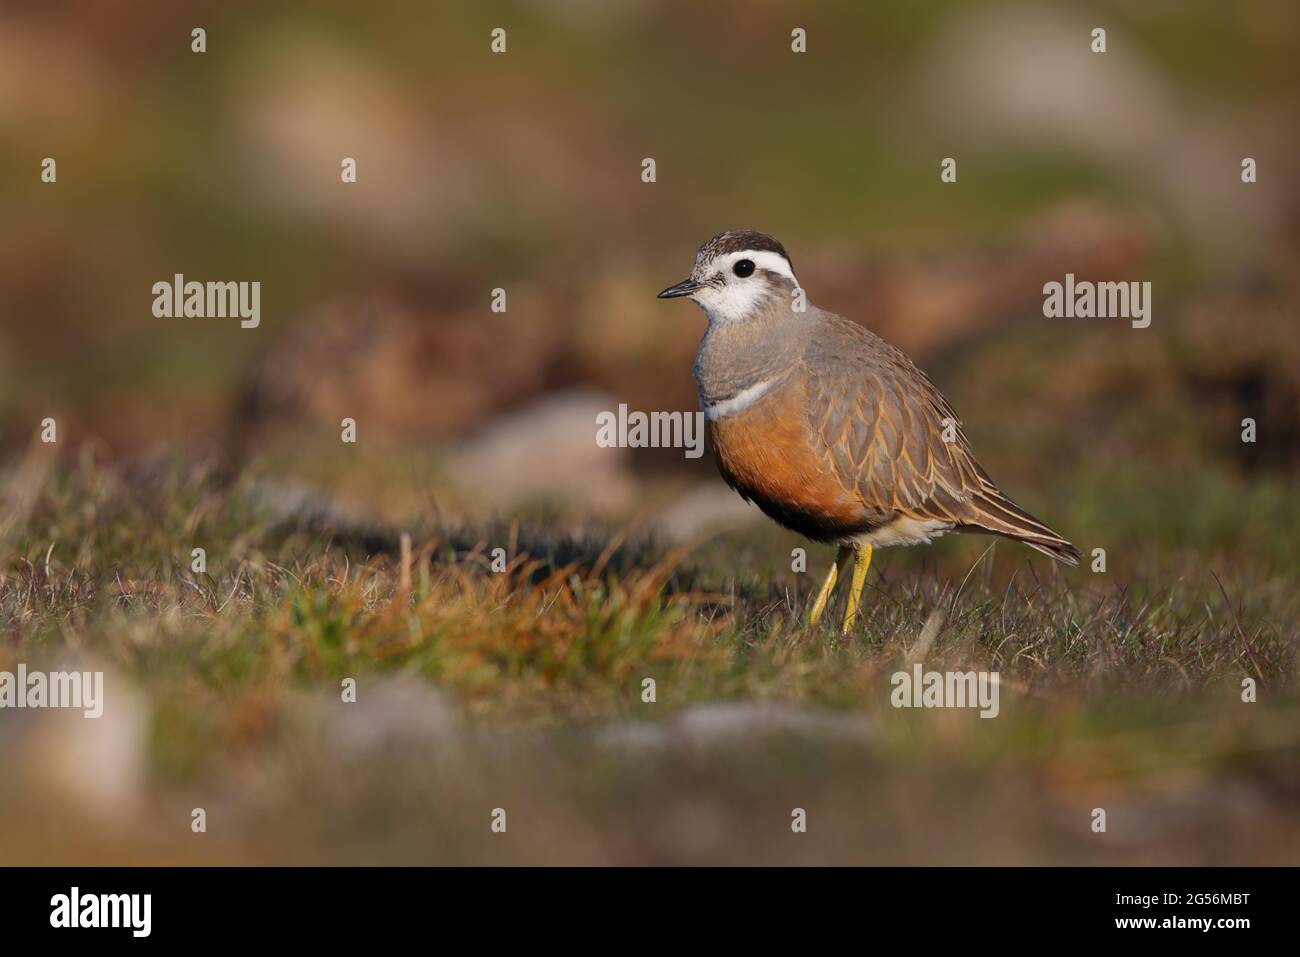 An adult female Eurasian Dotterel (Charadrius morinellus) in breeding plumage at the traditional migration staging post of Pendle Hill, Lancashire, UK Stock Photo